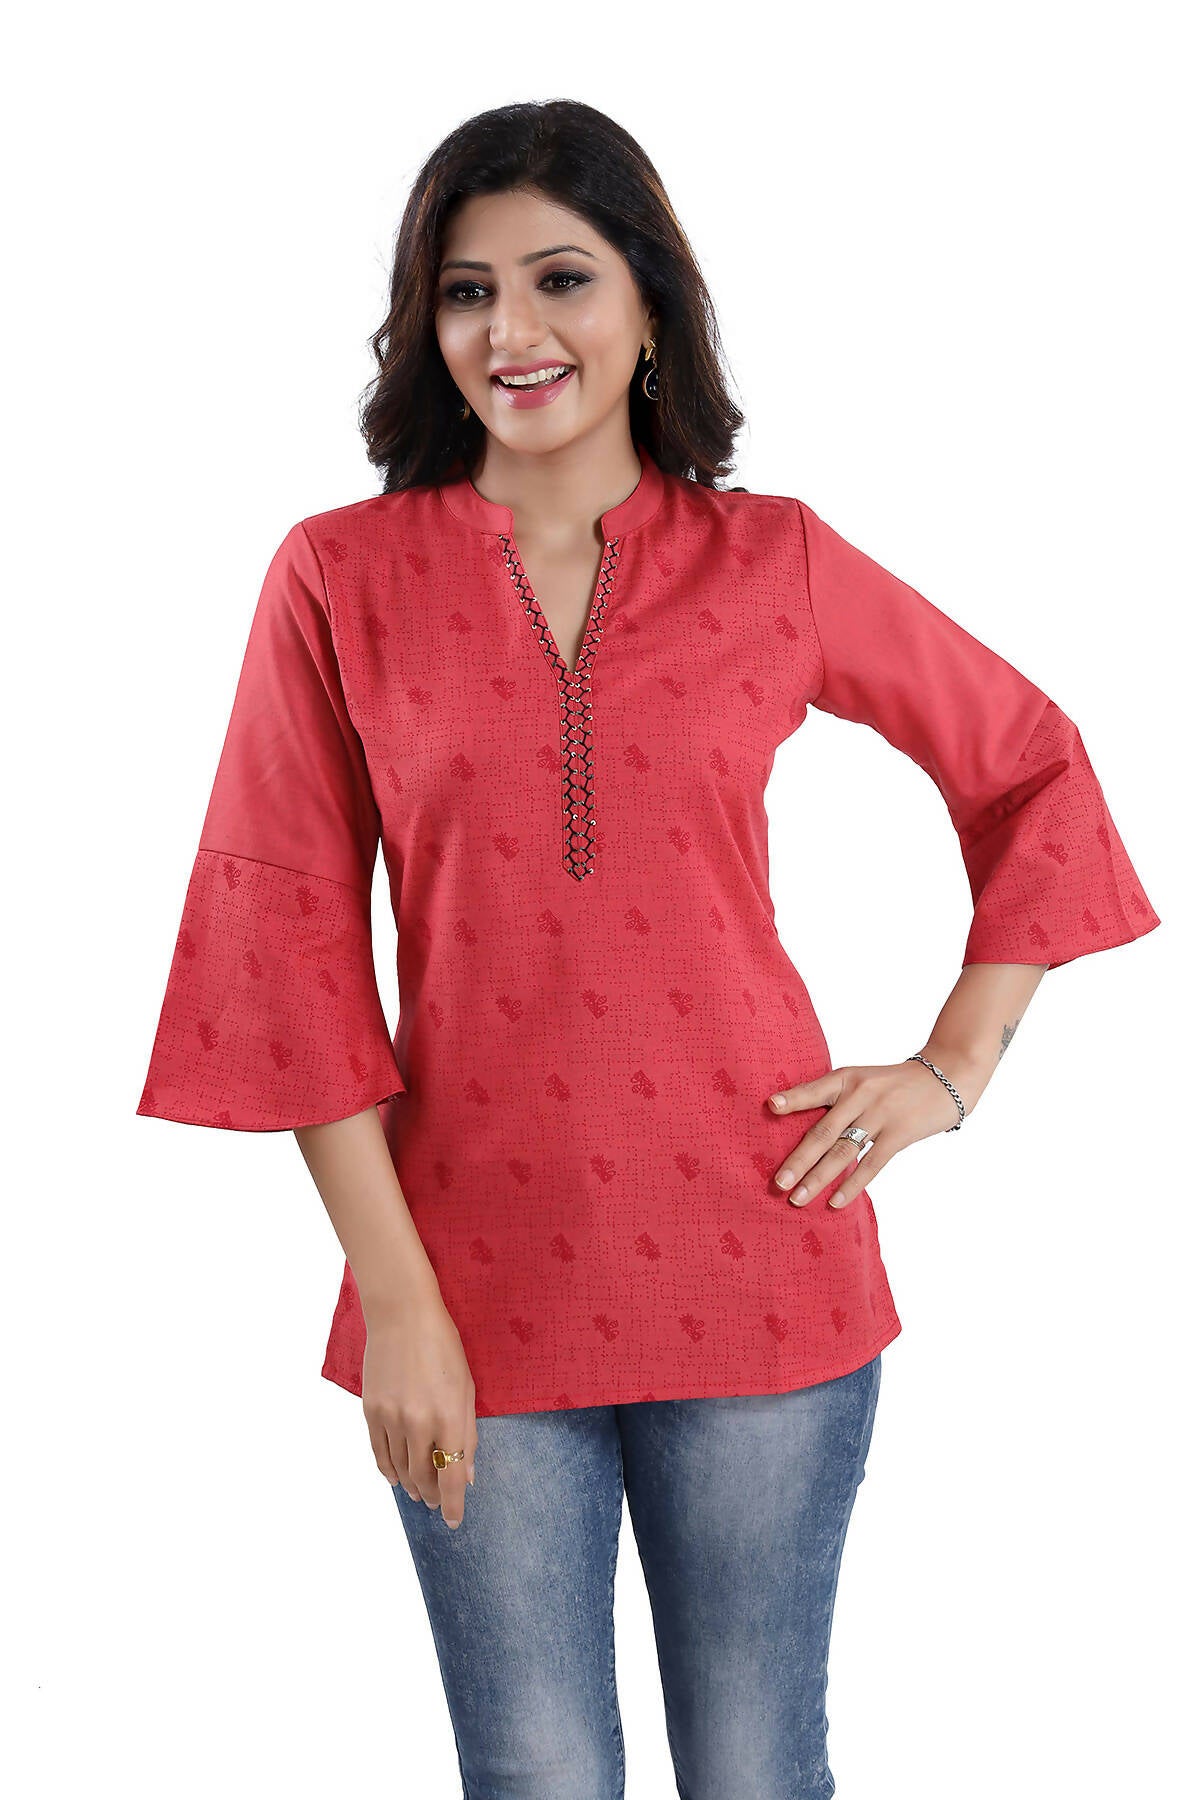 Snehal Creations Tomato Cotton Blended Casual Short Tunic Top - Distacart